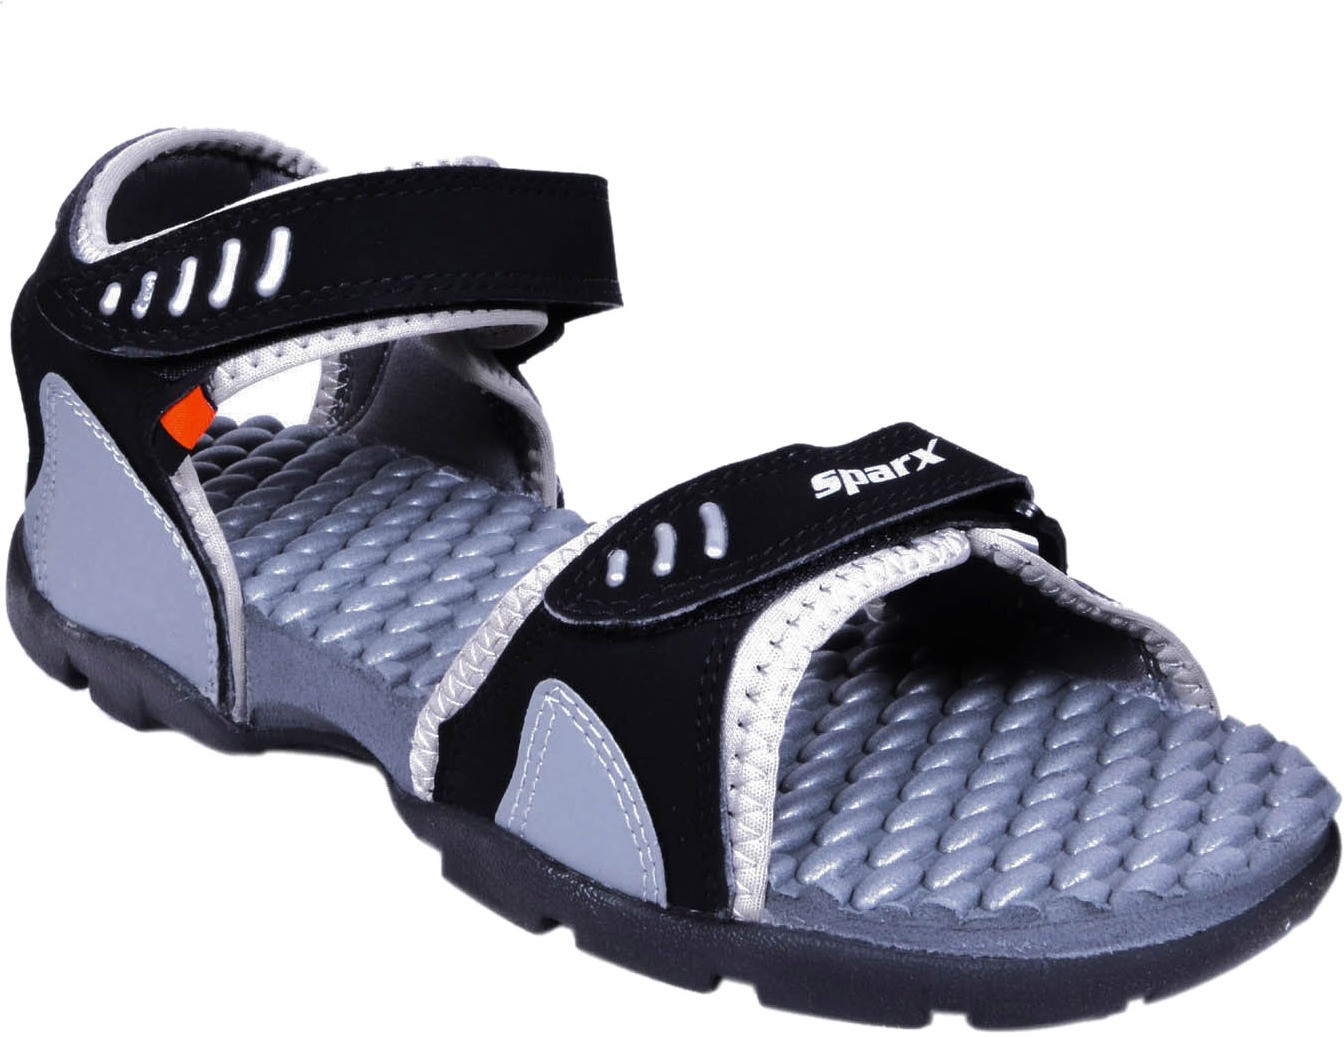 Sandal shoes Black and White Stock Photos & Images - Alamy